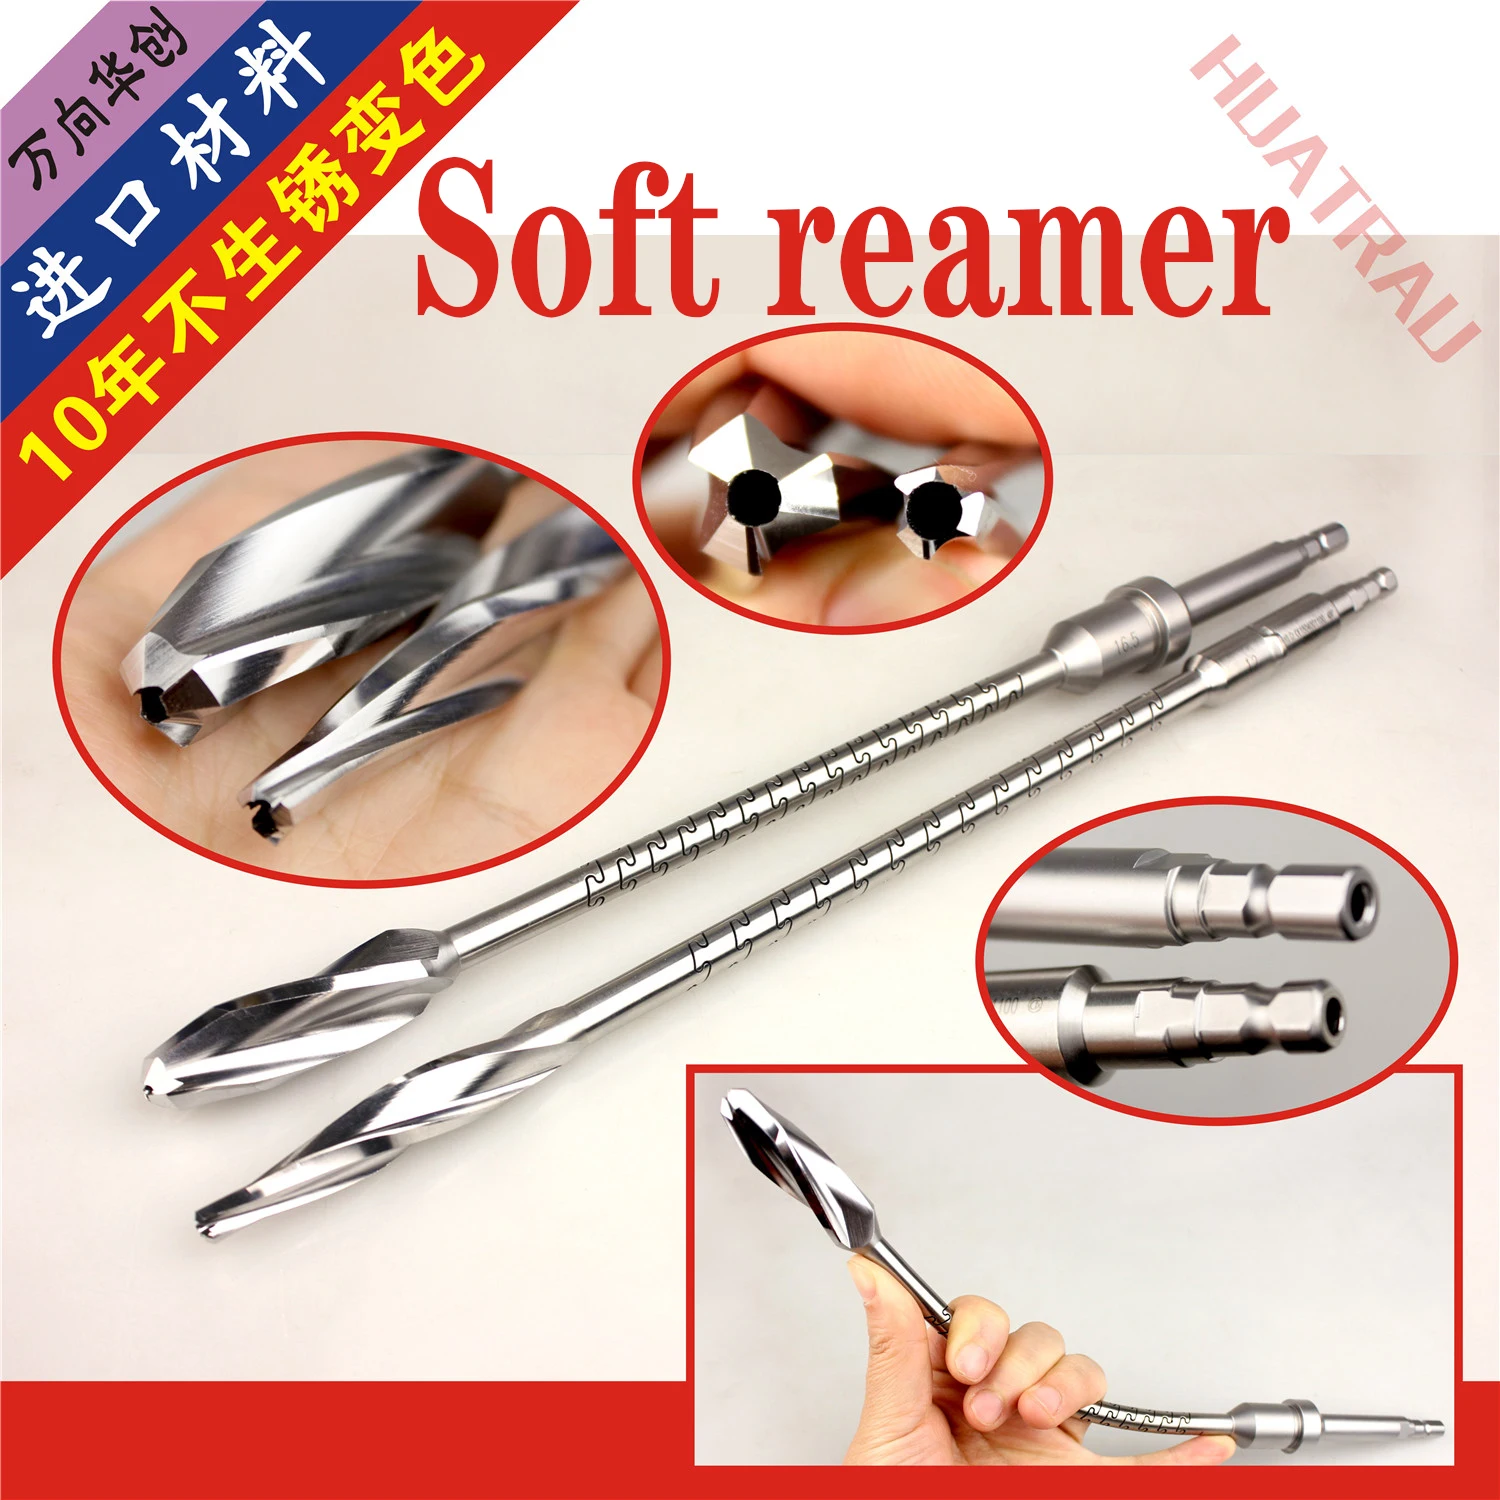 

Orthopaedic instrument medical soft reamer Femur tibia PFNA intramedullary nail opener hollow drill bit cannulated reaming hole